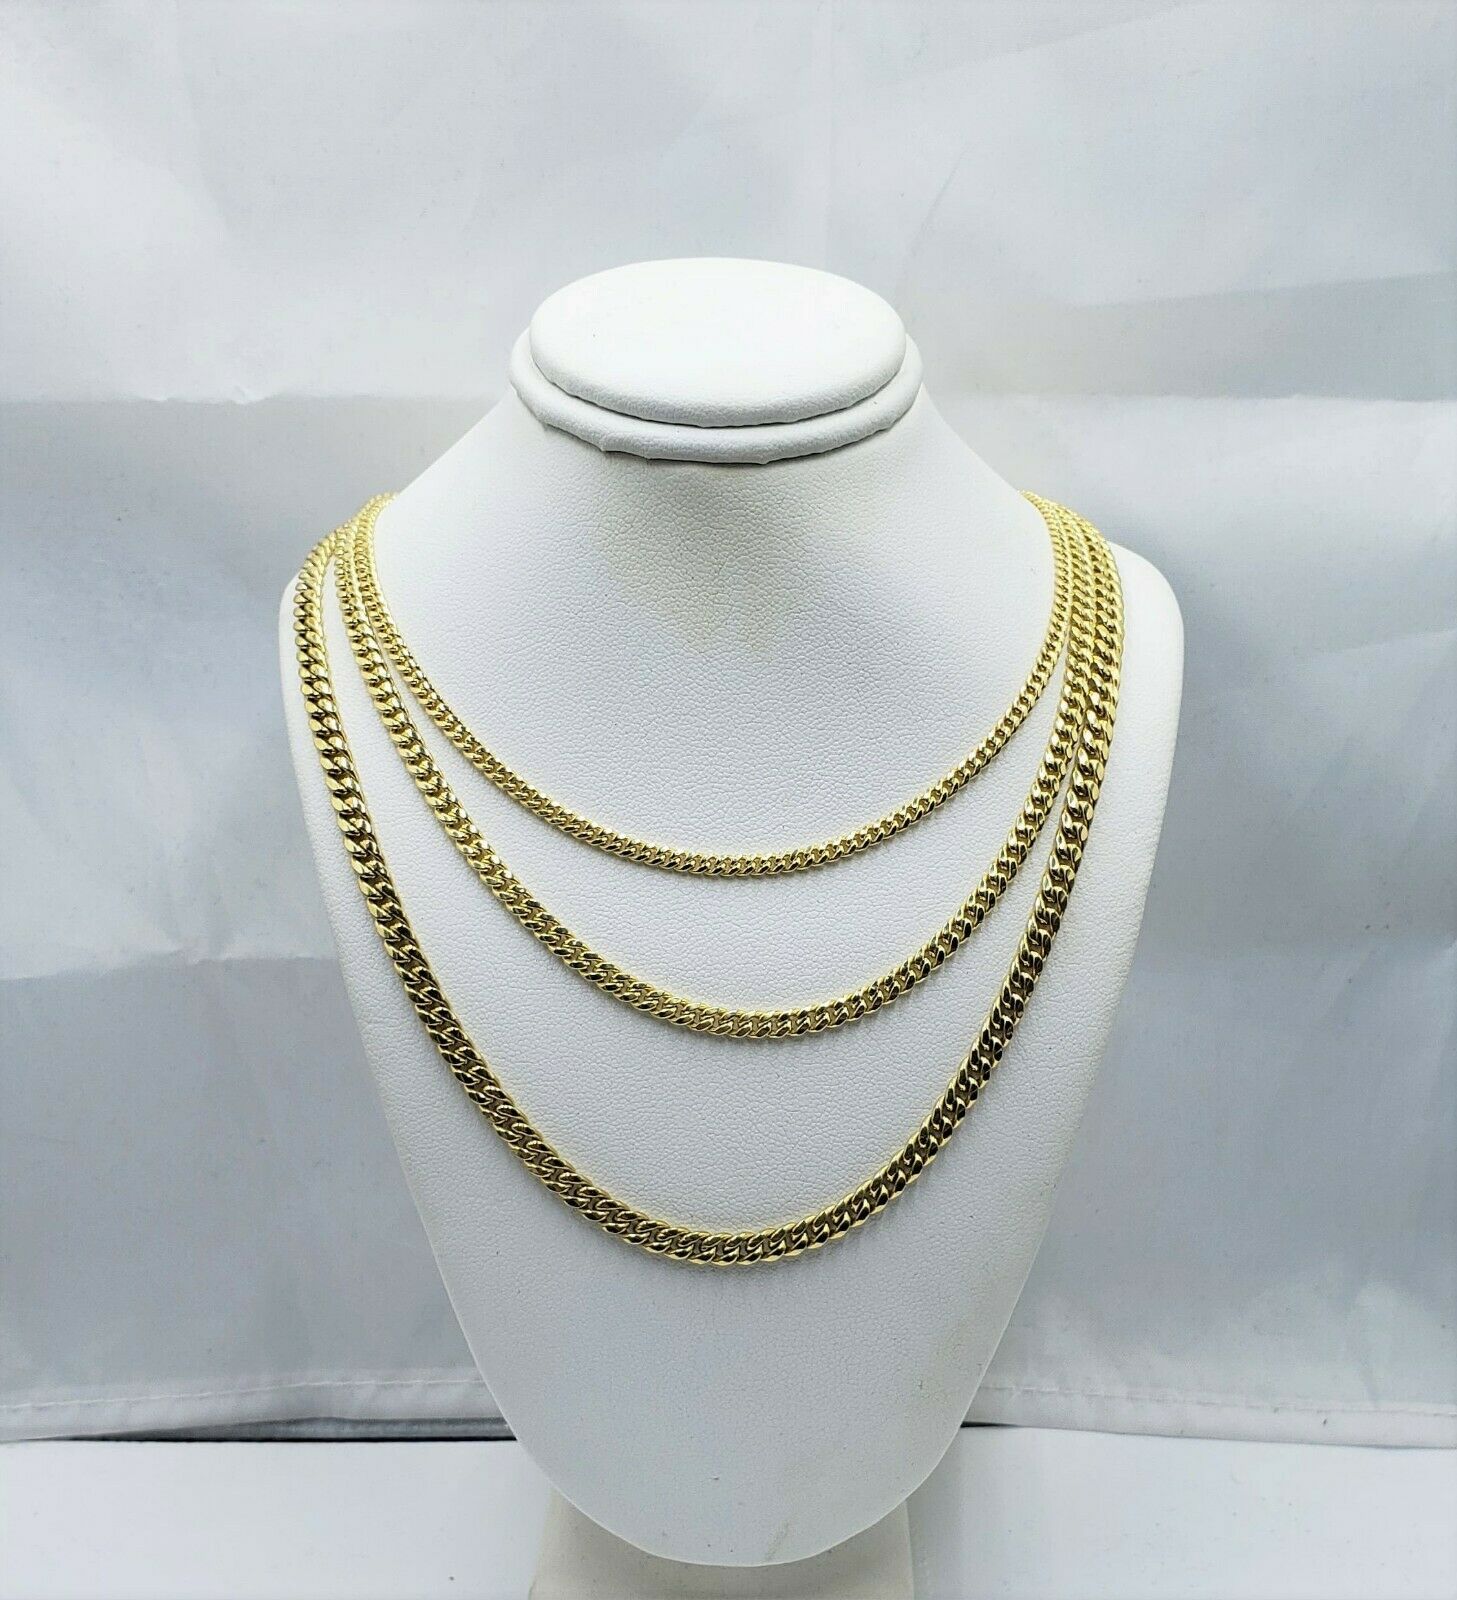 SOLID 14K Yellow Gold Chain Miami Cuban Necklace Men Women 22 24 26 28 Inch,Rope